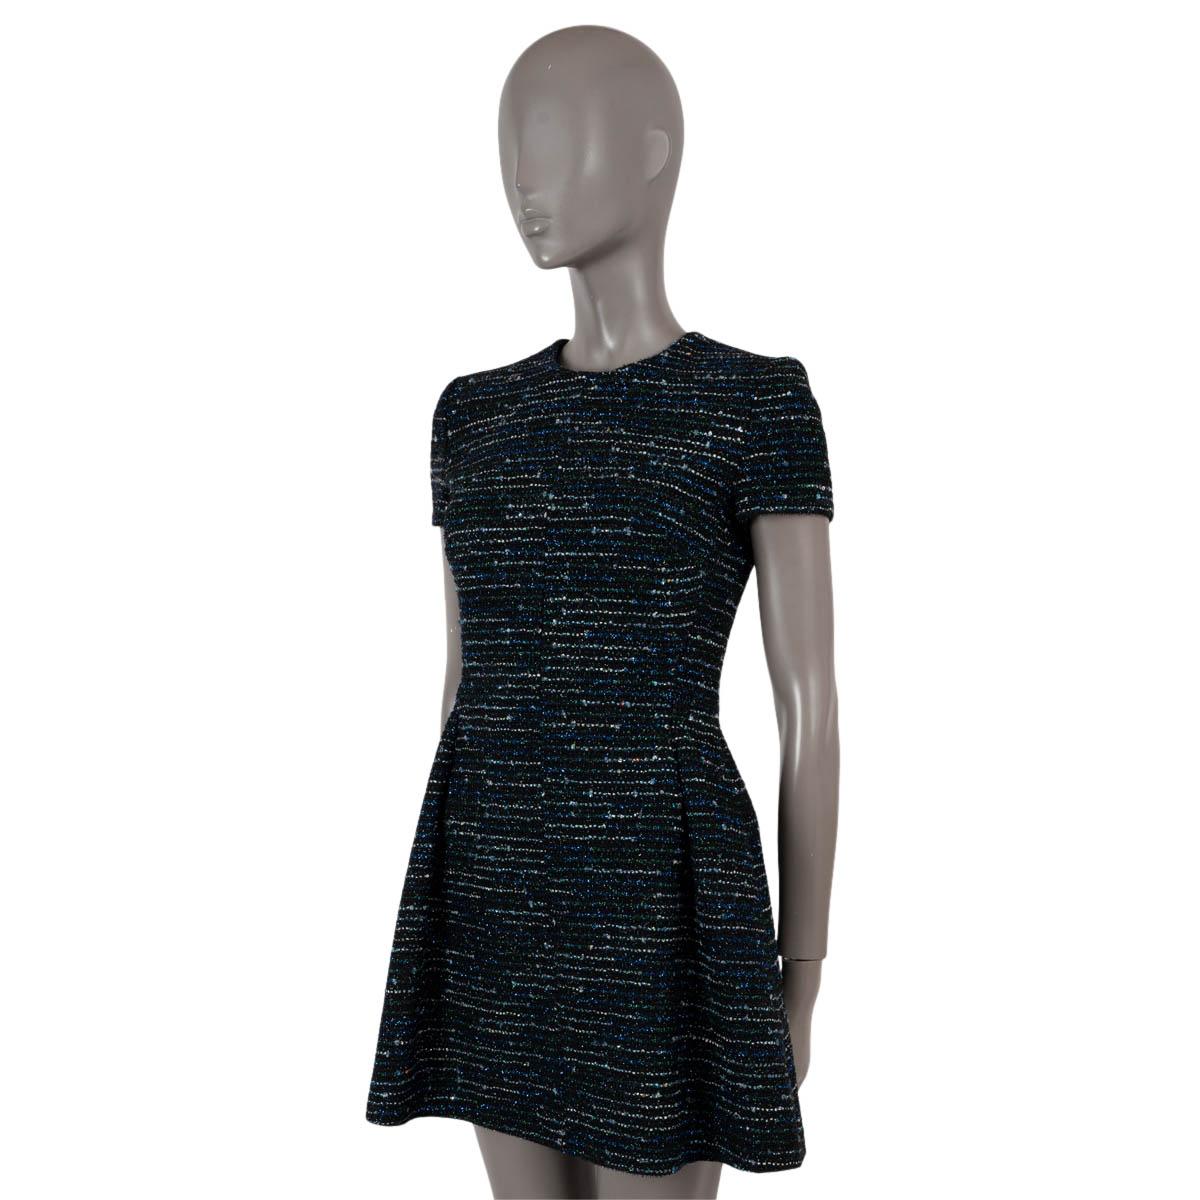 100% authentic Christian Dior tweed sheath dress in black wool (55%), nylon (34%), metalised yarn (4%), polyamide (3%), viscose (3%) and polyester (1%) Features a fit and flare silhouette, blue and green lurex details, short sleeves and two side